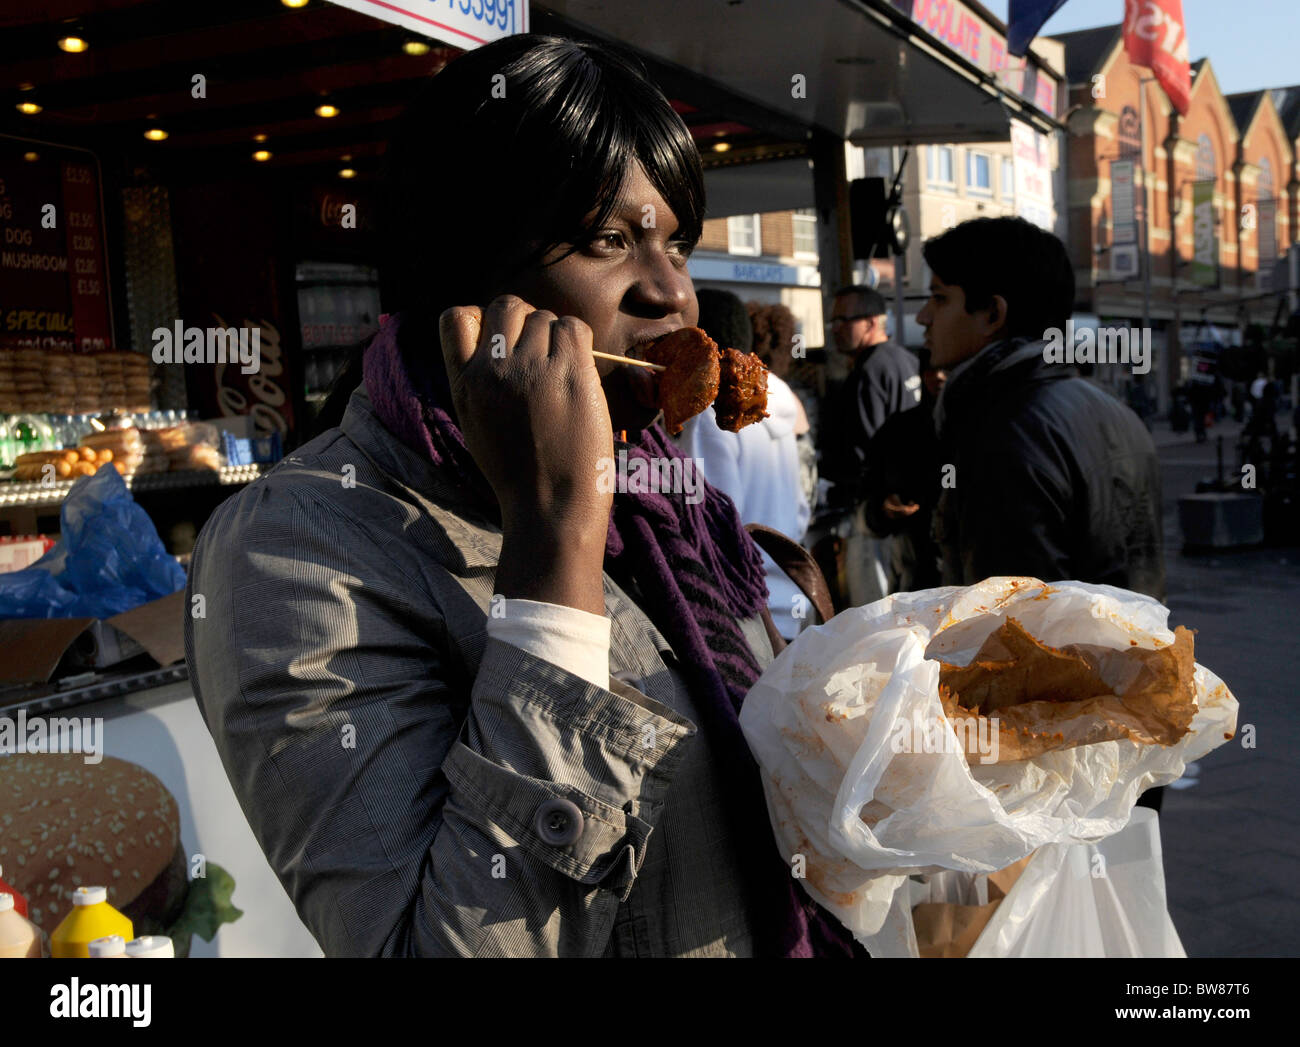 UK AFRO CARIBBEAN WOMAN EATING AT FOOD STALL IN THE STREETS OF BARKING, LONDON Stock Photo